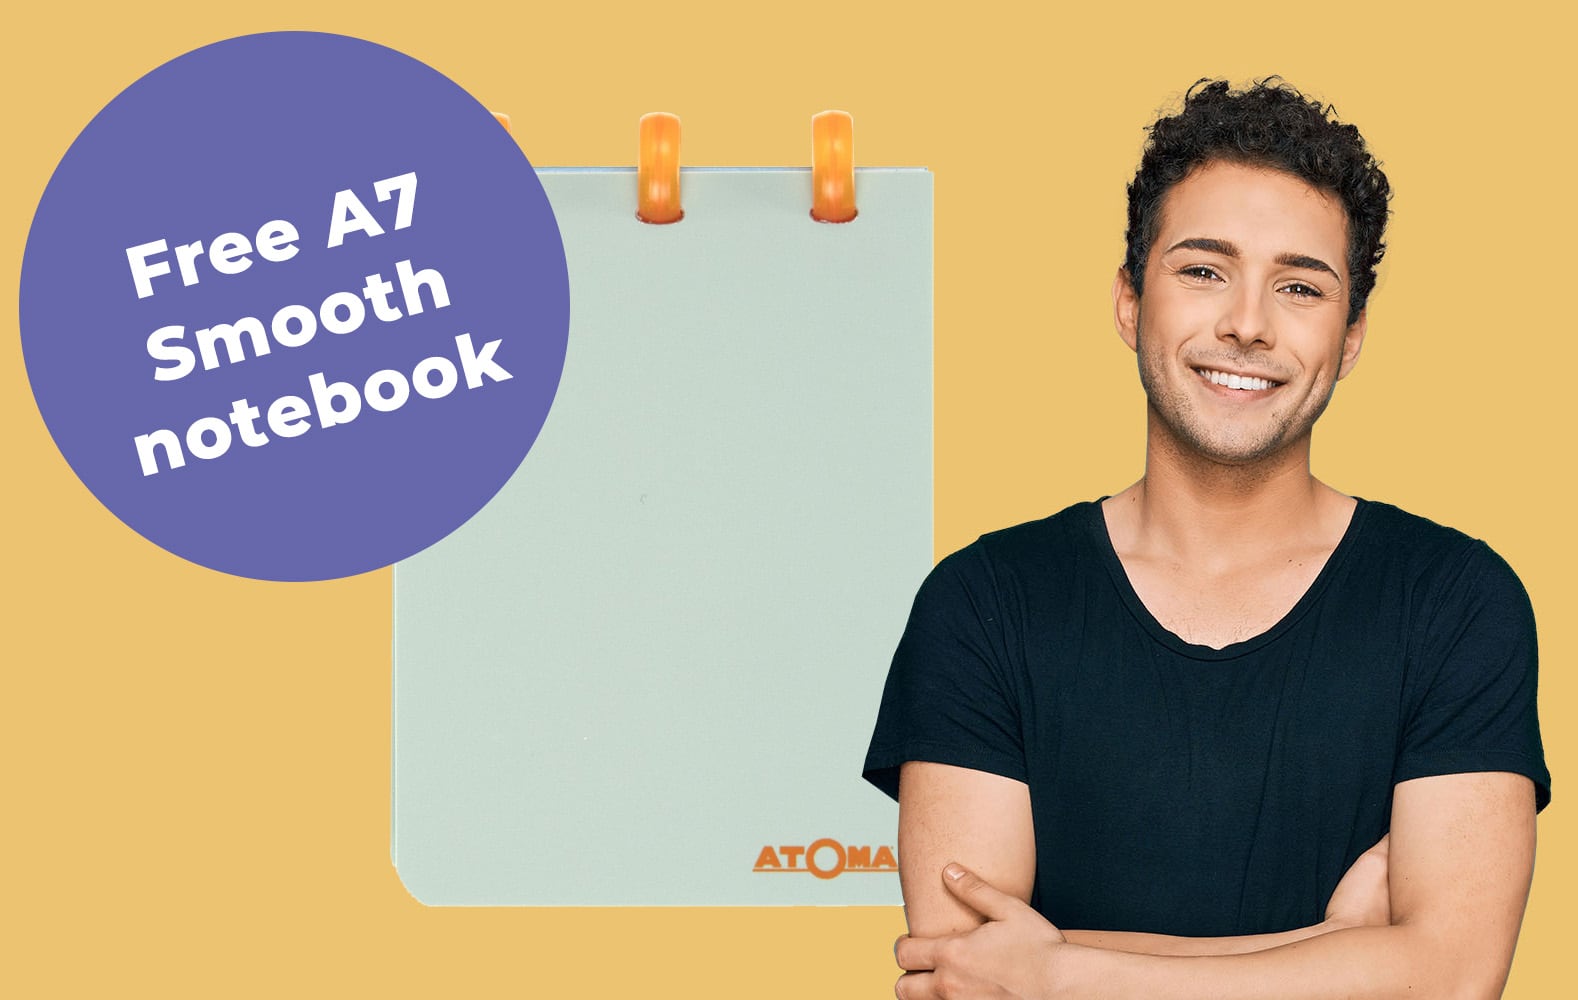 Free Smooth A7 notebook